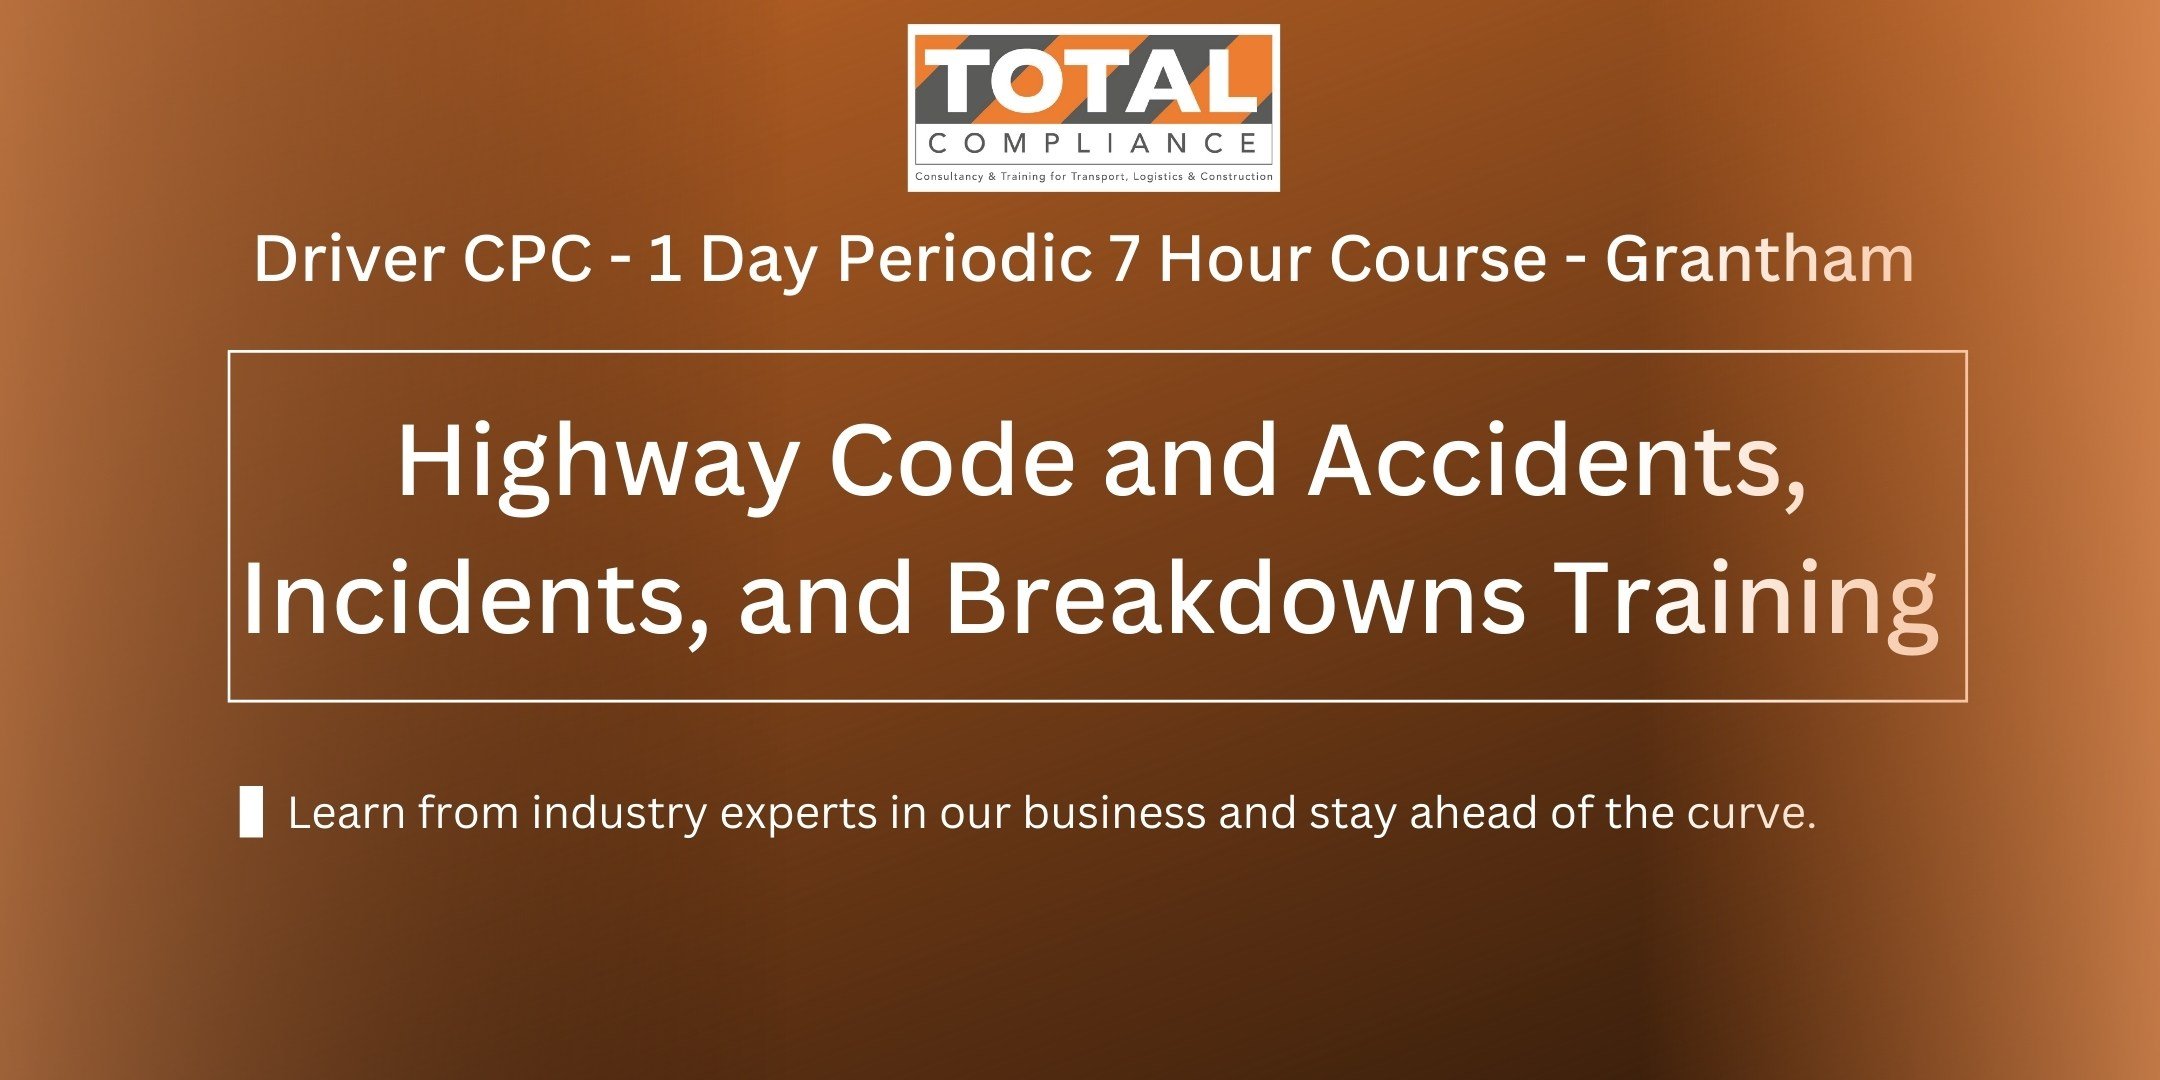 Driver CPC - 1 Day Periodic 7 Hour Course/ Highway Code, Accidents, Incidents, and Breakdowns Training  -Birmingham